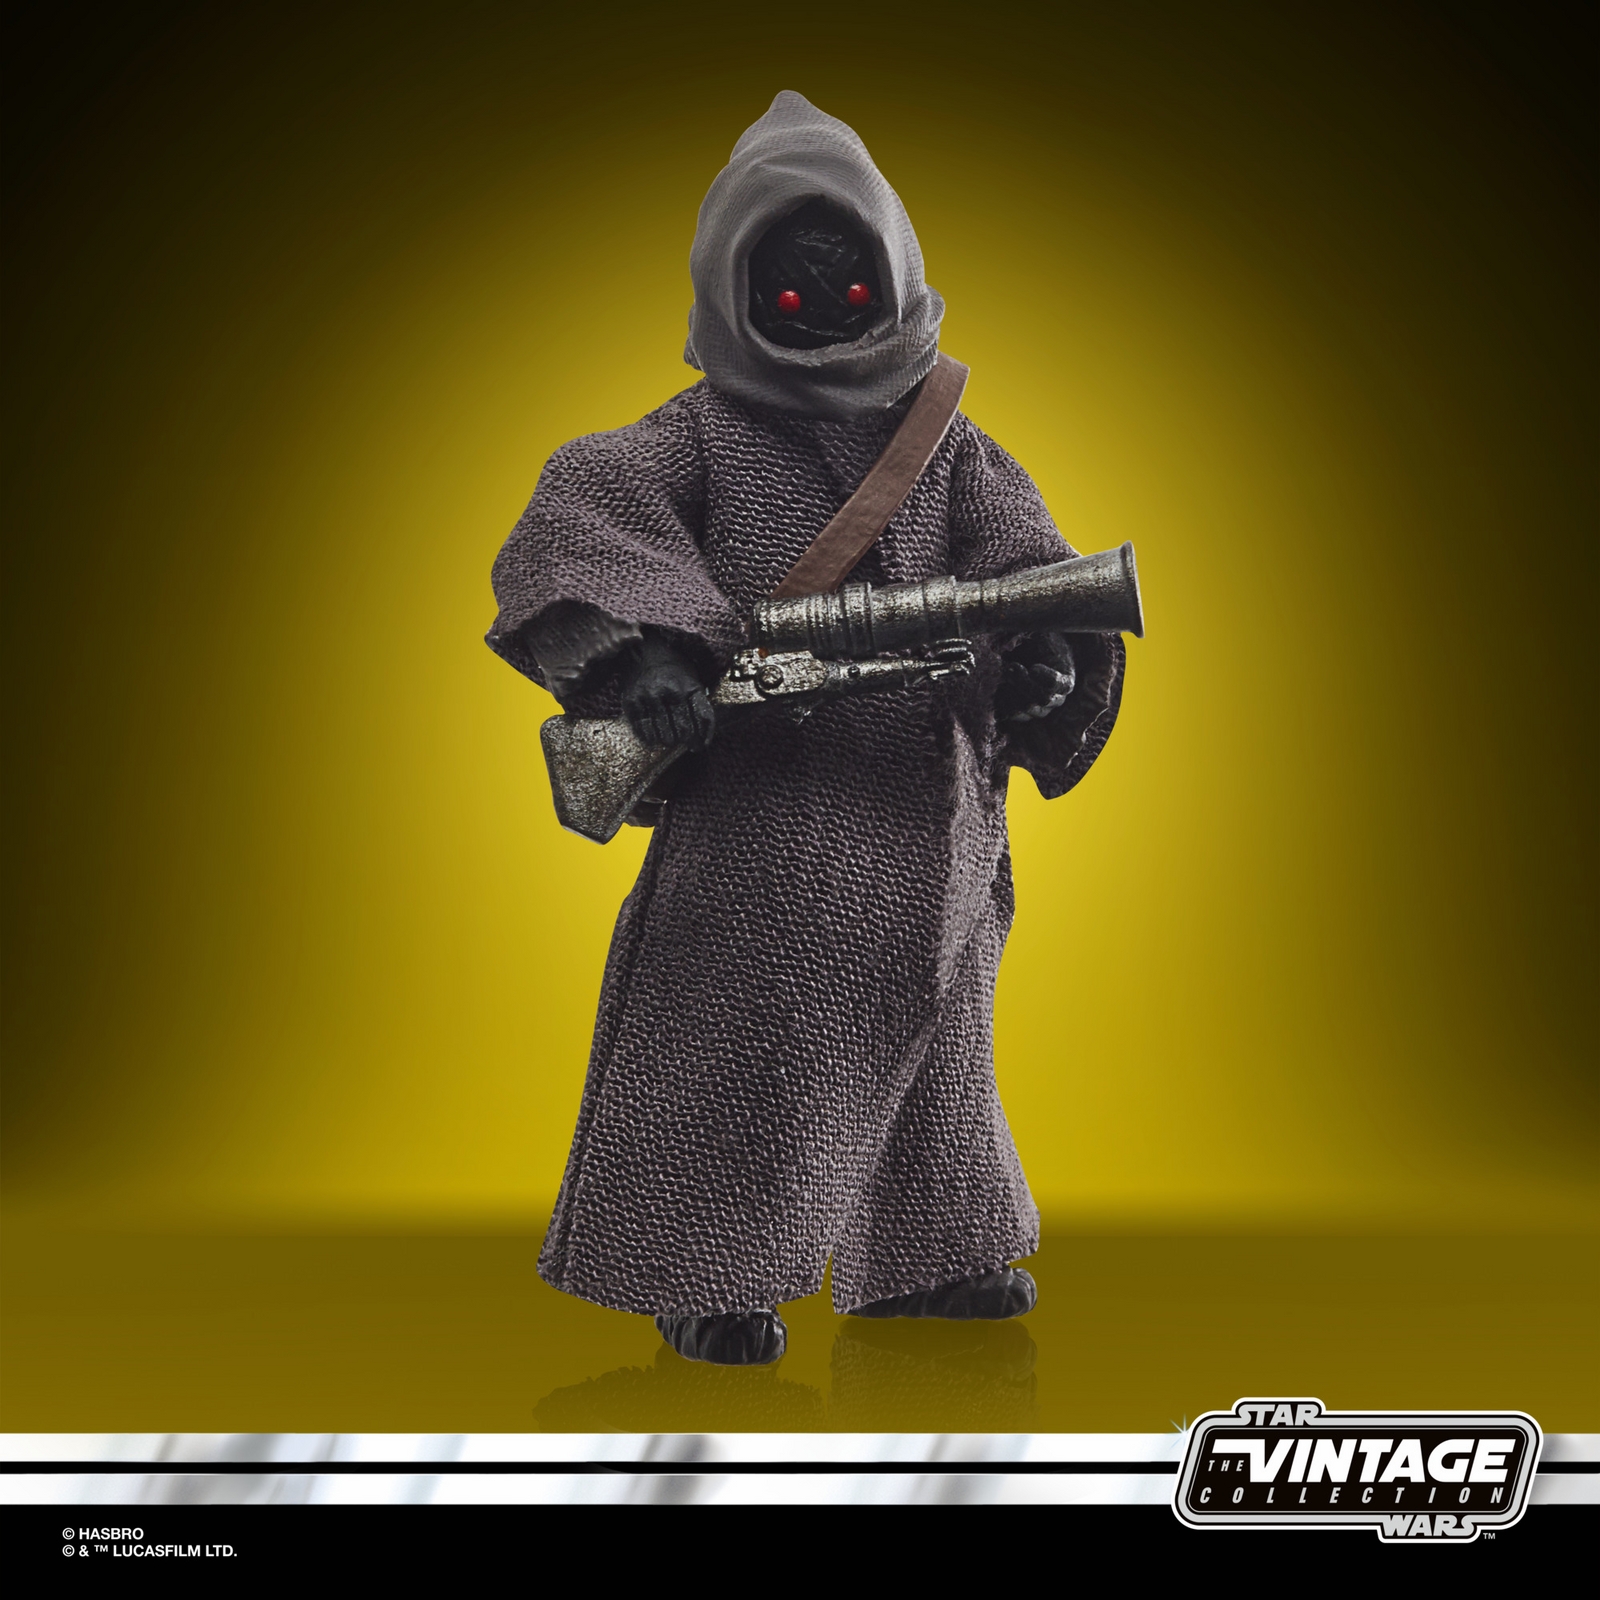 STAR WARS THE VINTAGE COLLECTION 3.75-INCH OFFWORLD JAWA (ARVALA-7) Figure  - oop (2).jpg